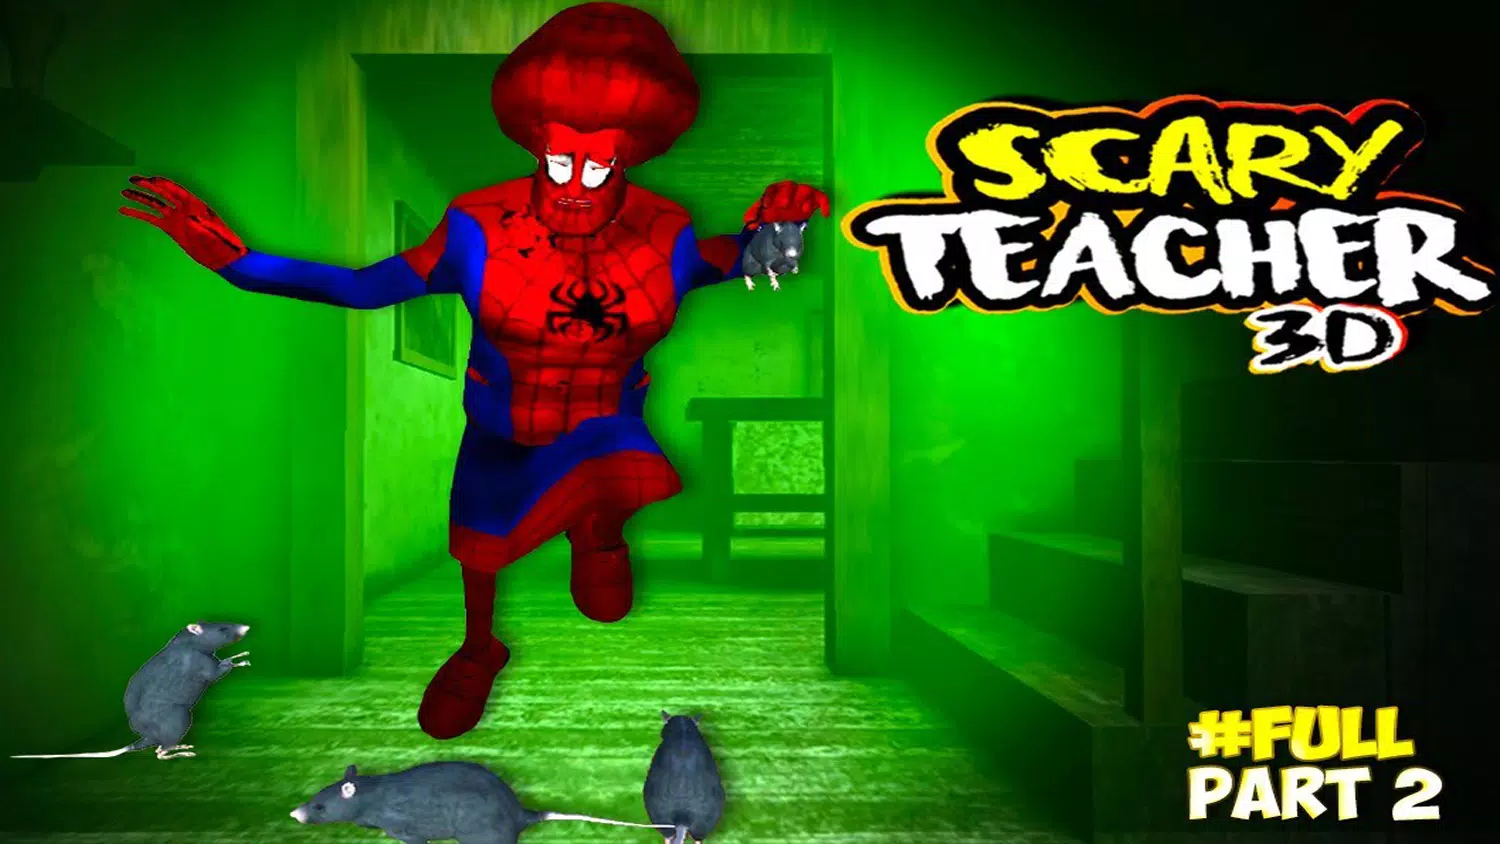 Scary Haunted Teacher 3D - Spooky & Creepy Games v1.0.0 MOD APK -   - Android & iOS MODs, Mobile Games & Apps